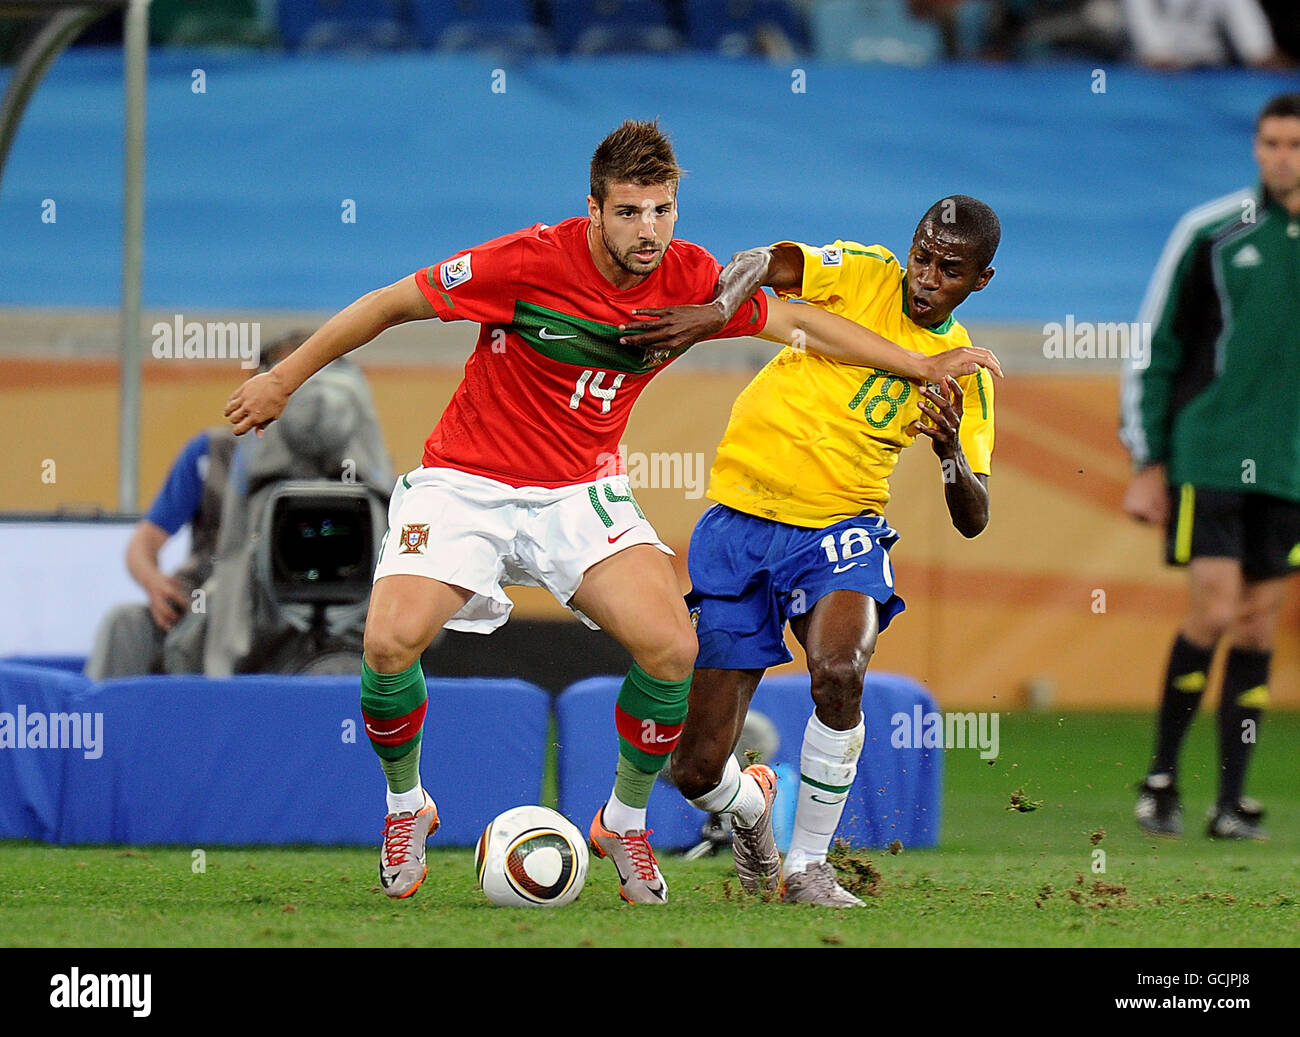 Soccer - 2010 FIFA World Cup South Africa - Group G - Portugal v Brazil - Durban Stadium. Brazil's Nascimento Ramires (right) and Portugal's Miguel Veloso (left) battle for the ball Stock Photo